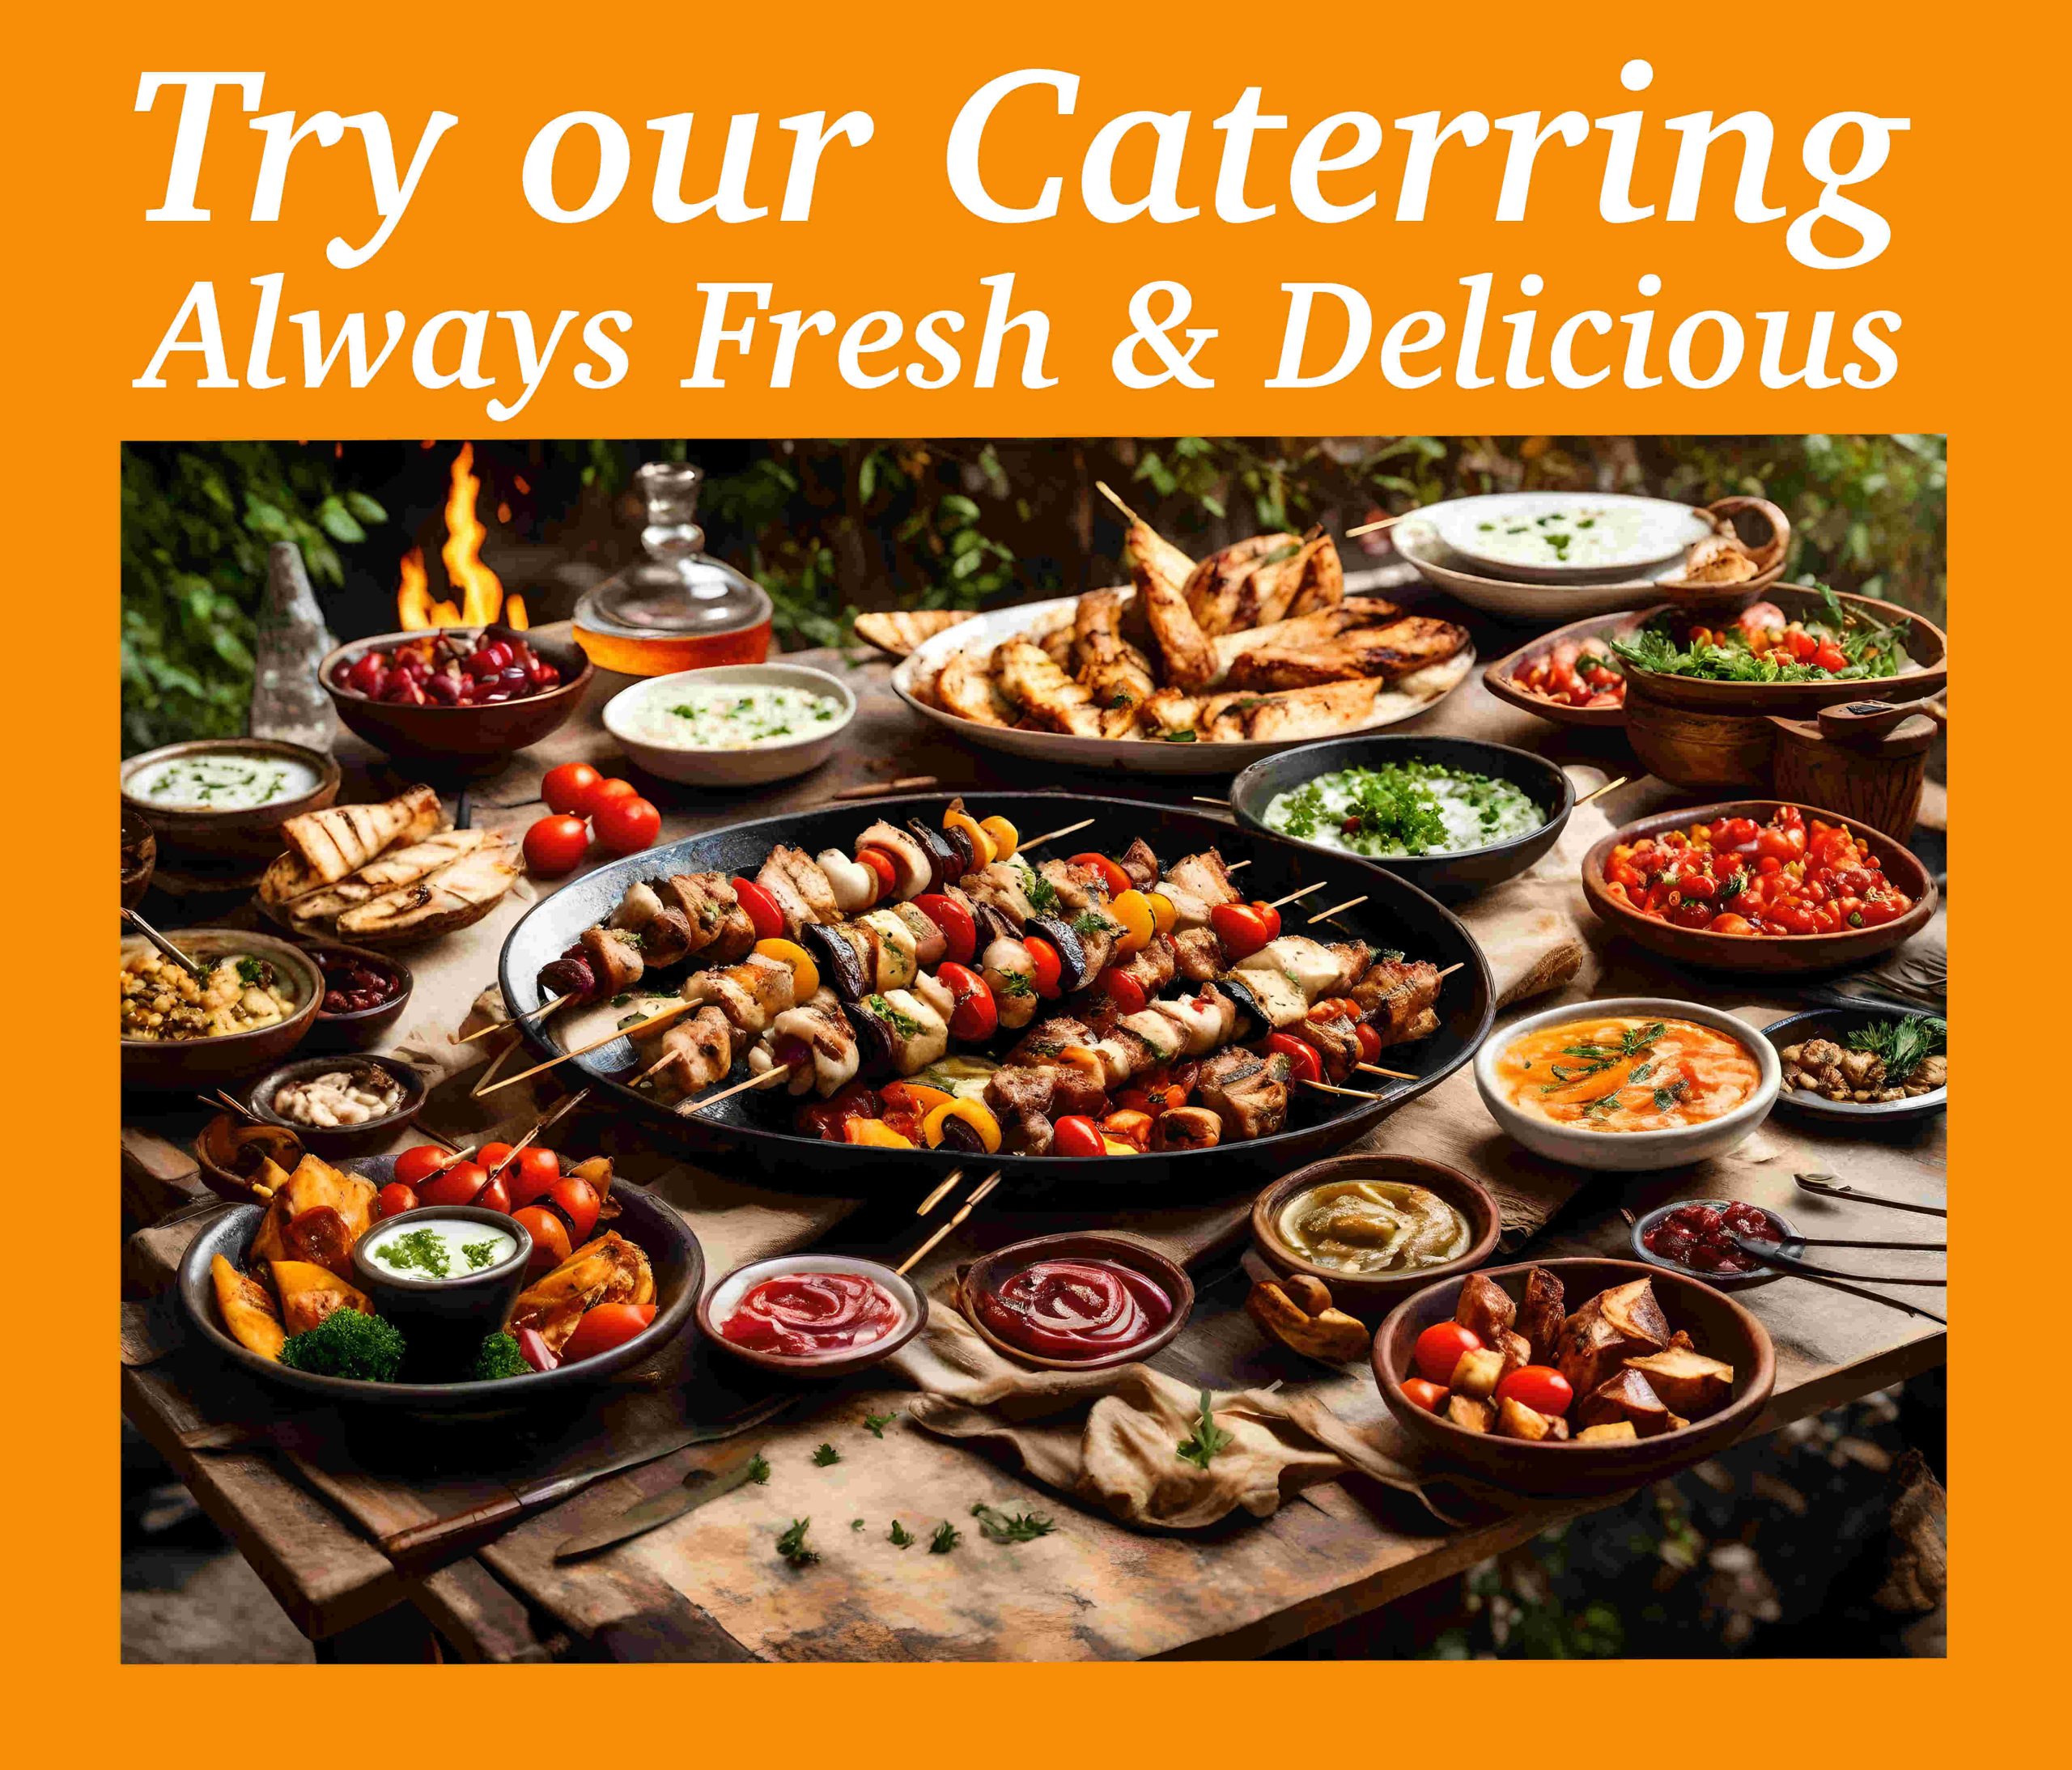 Antolian catering scaled